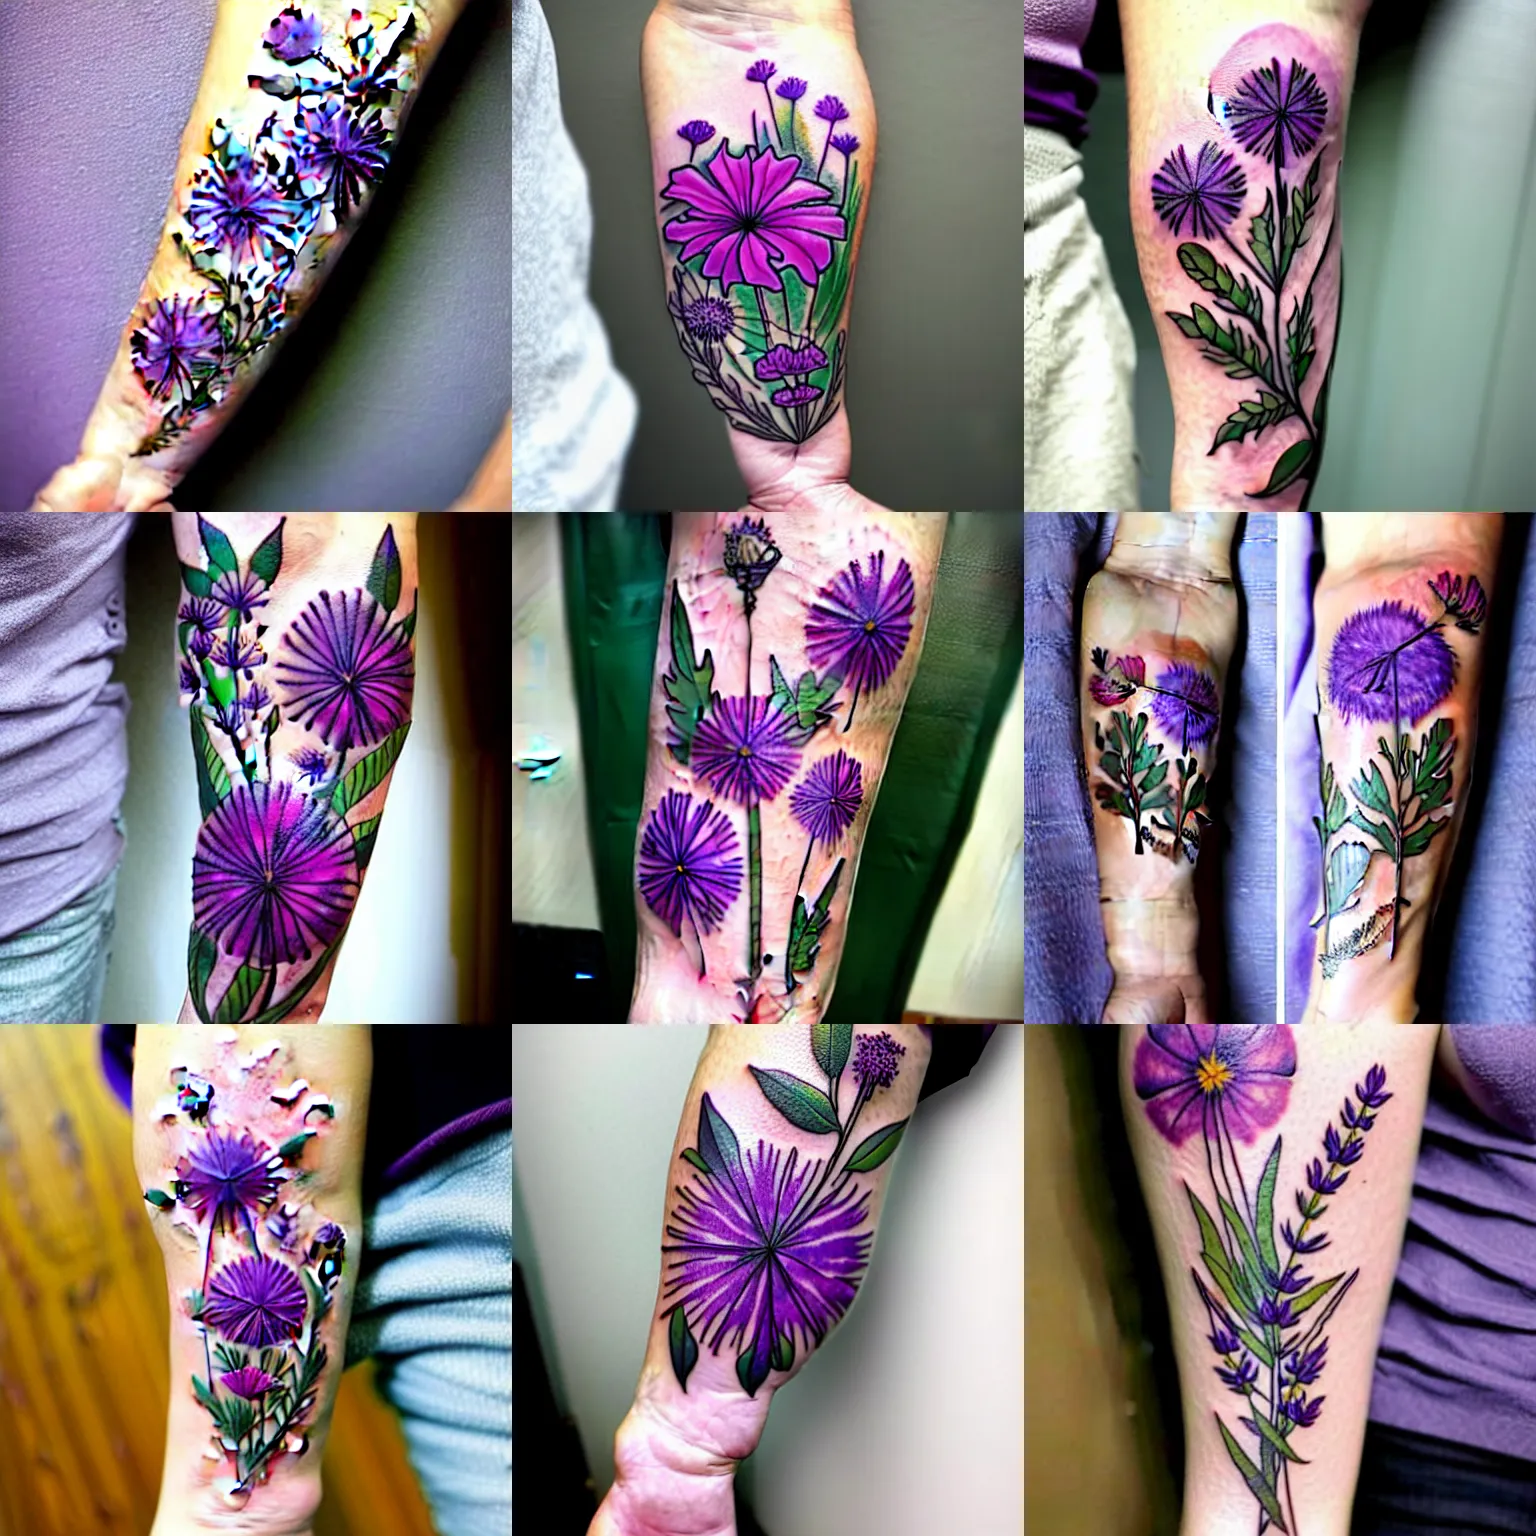 Six Artists Who Draw Gorgeous Botanical Tattoos - The New York Times